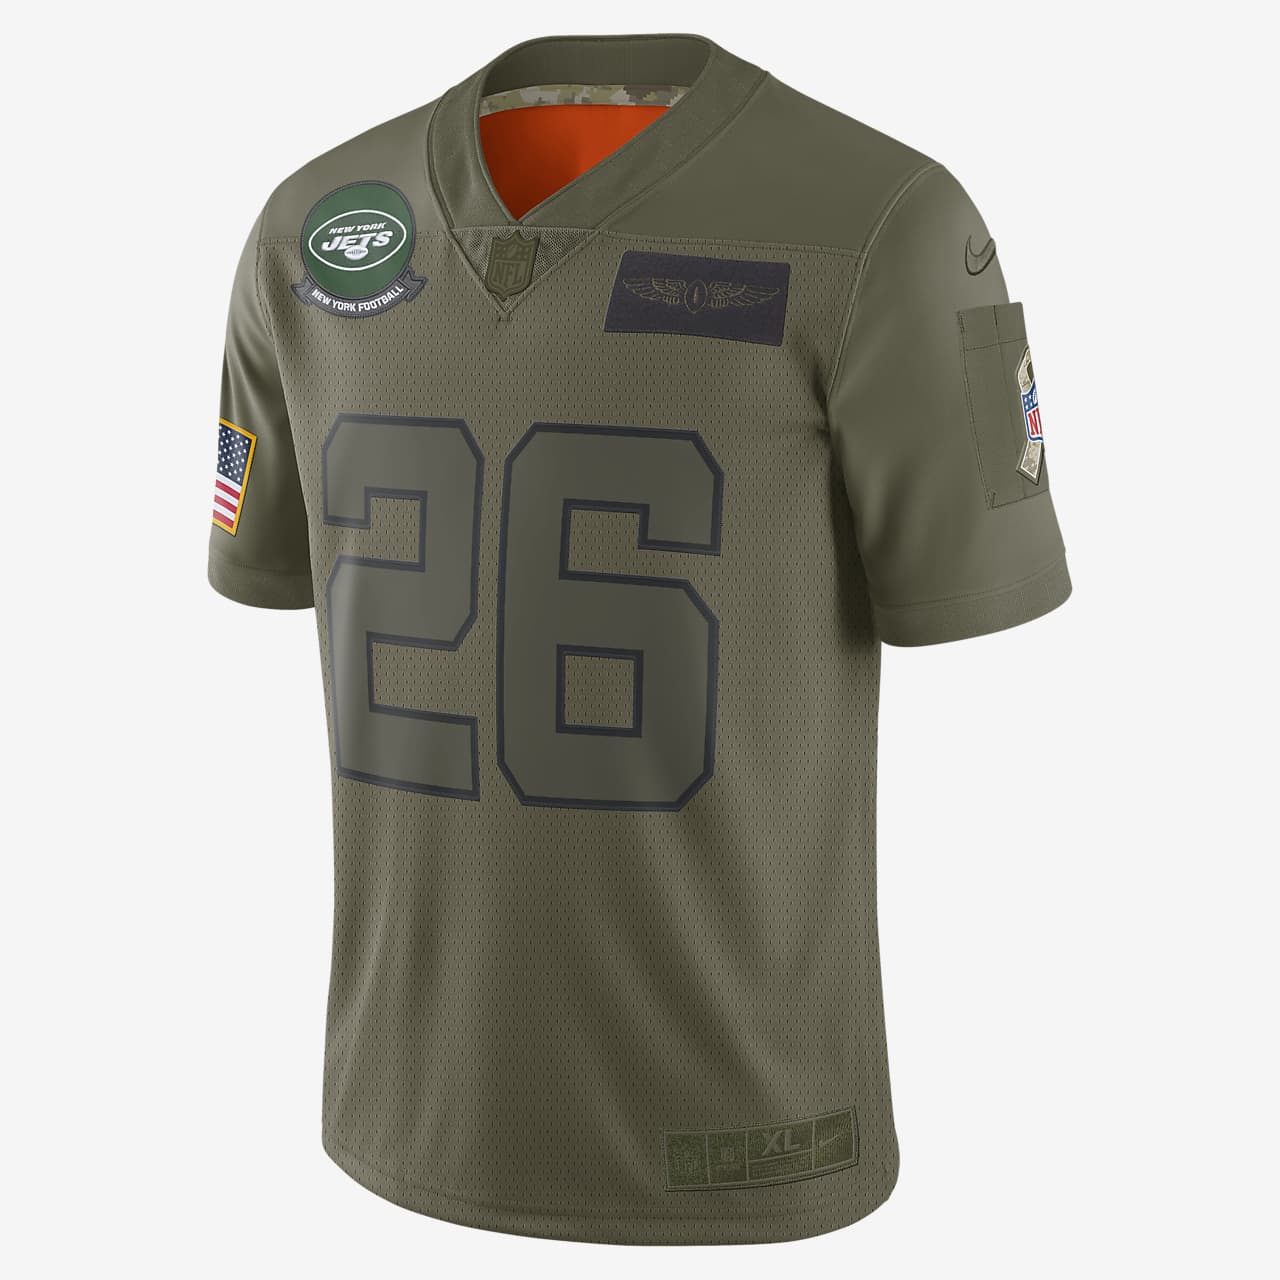 NFL New York Jets Limited Salute To 